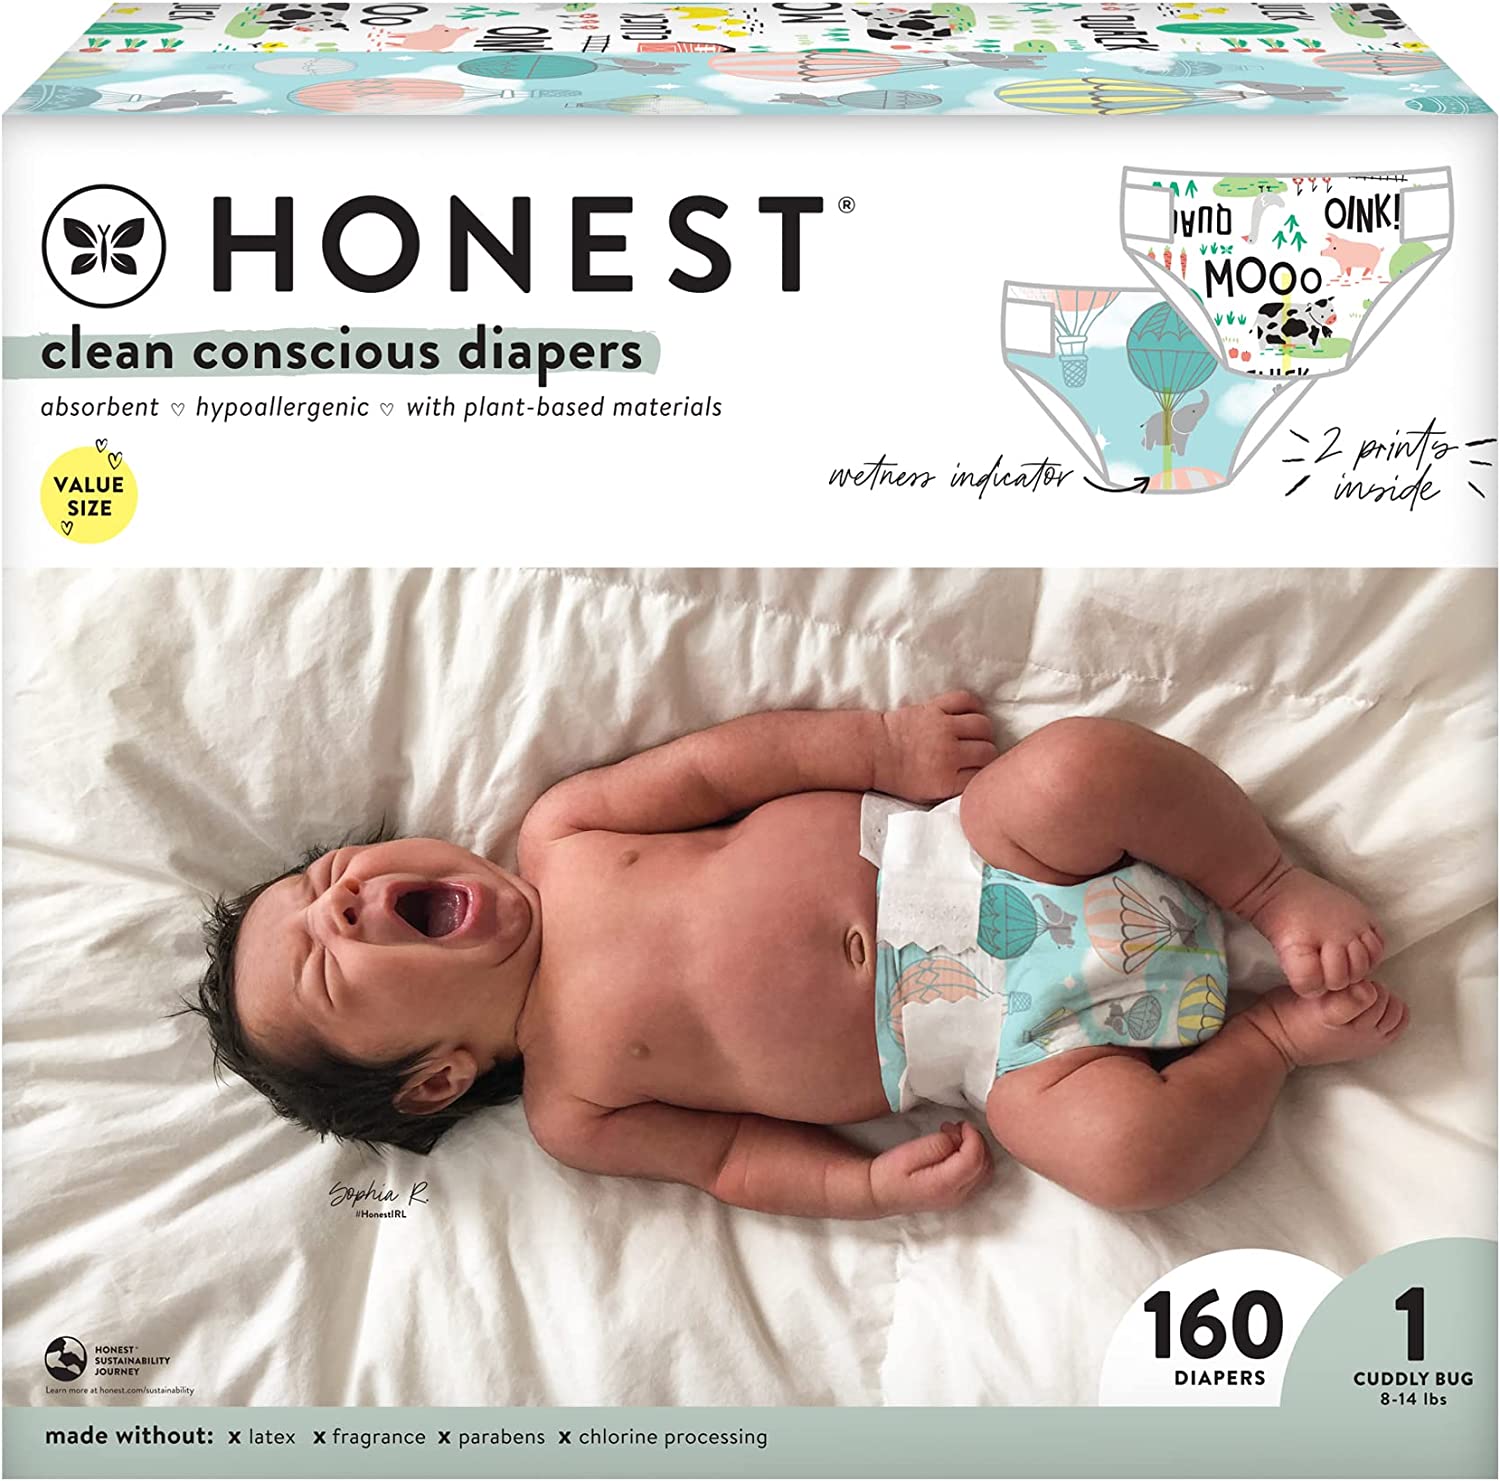 The Honest Company Clean Conscious Diapers | Plant-Based, Sustainable | Above All + Barnyard Babies | Super Club Box, Size 1 (8-14 lbs), 160 Count